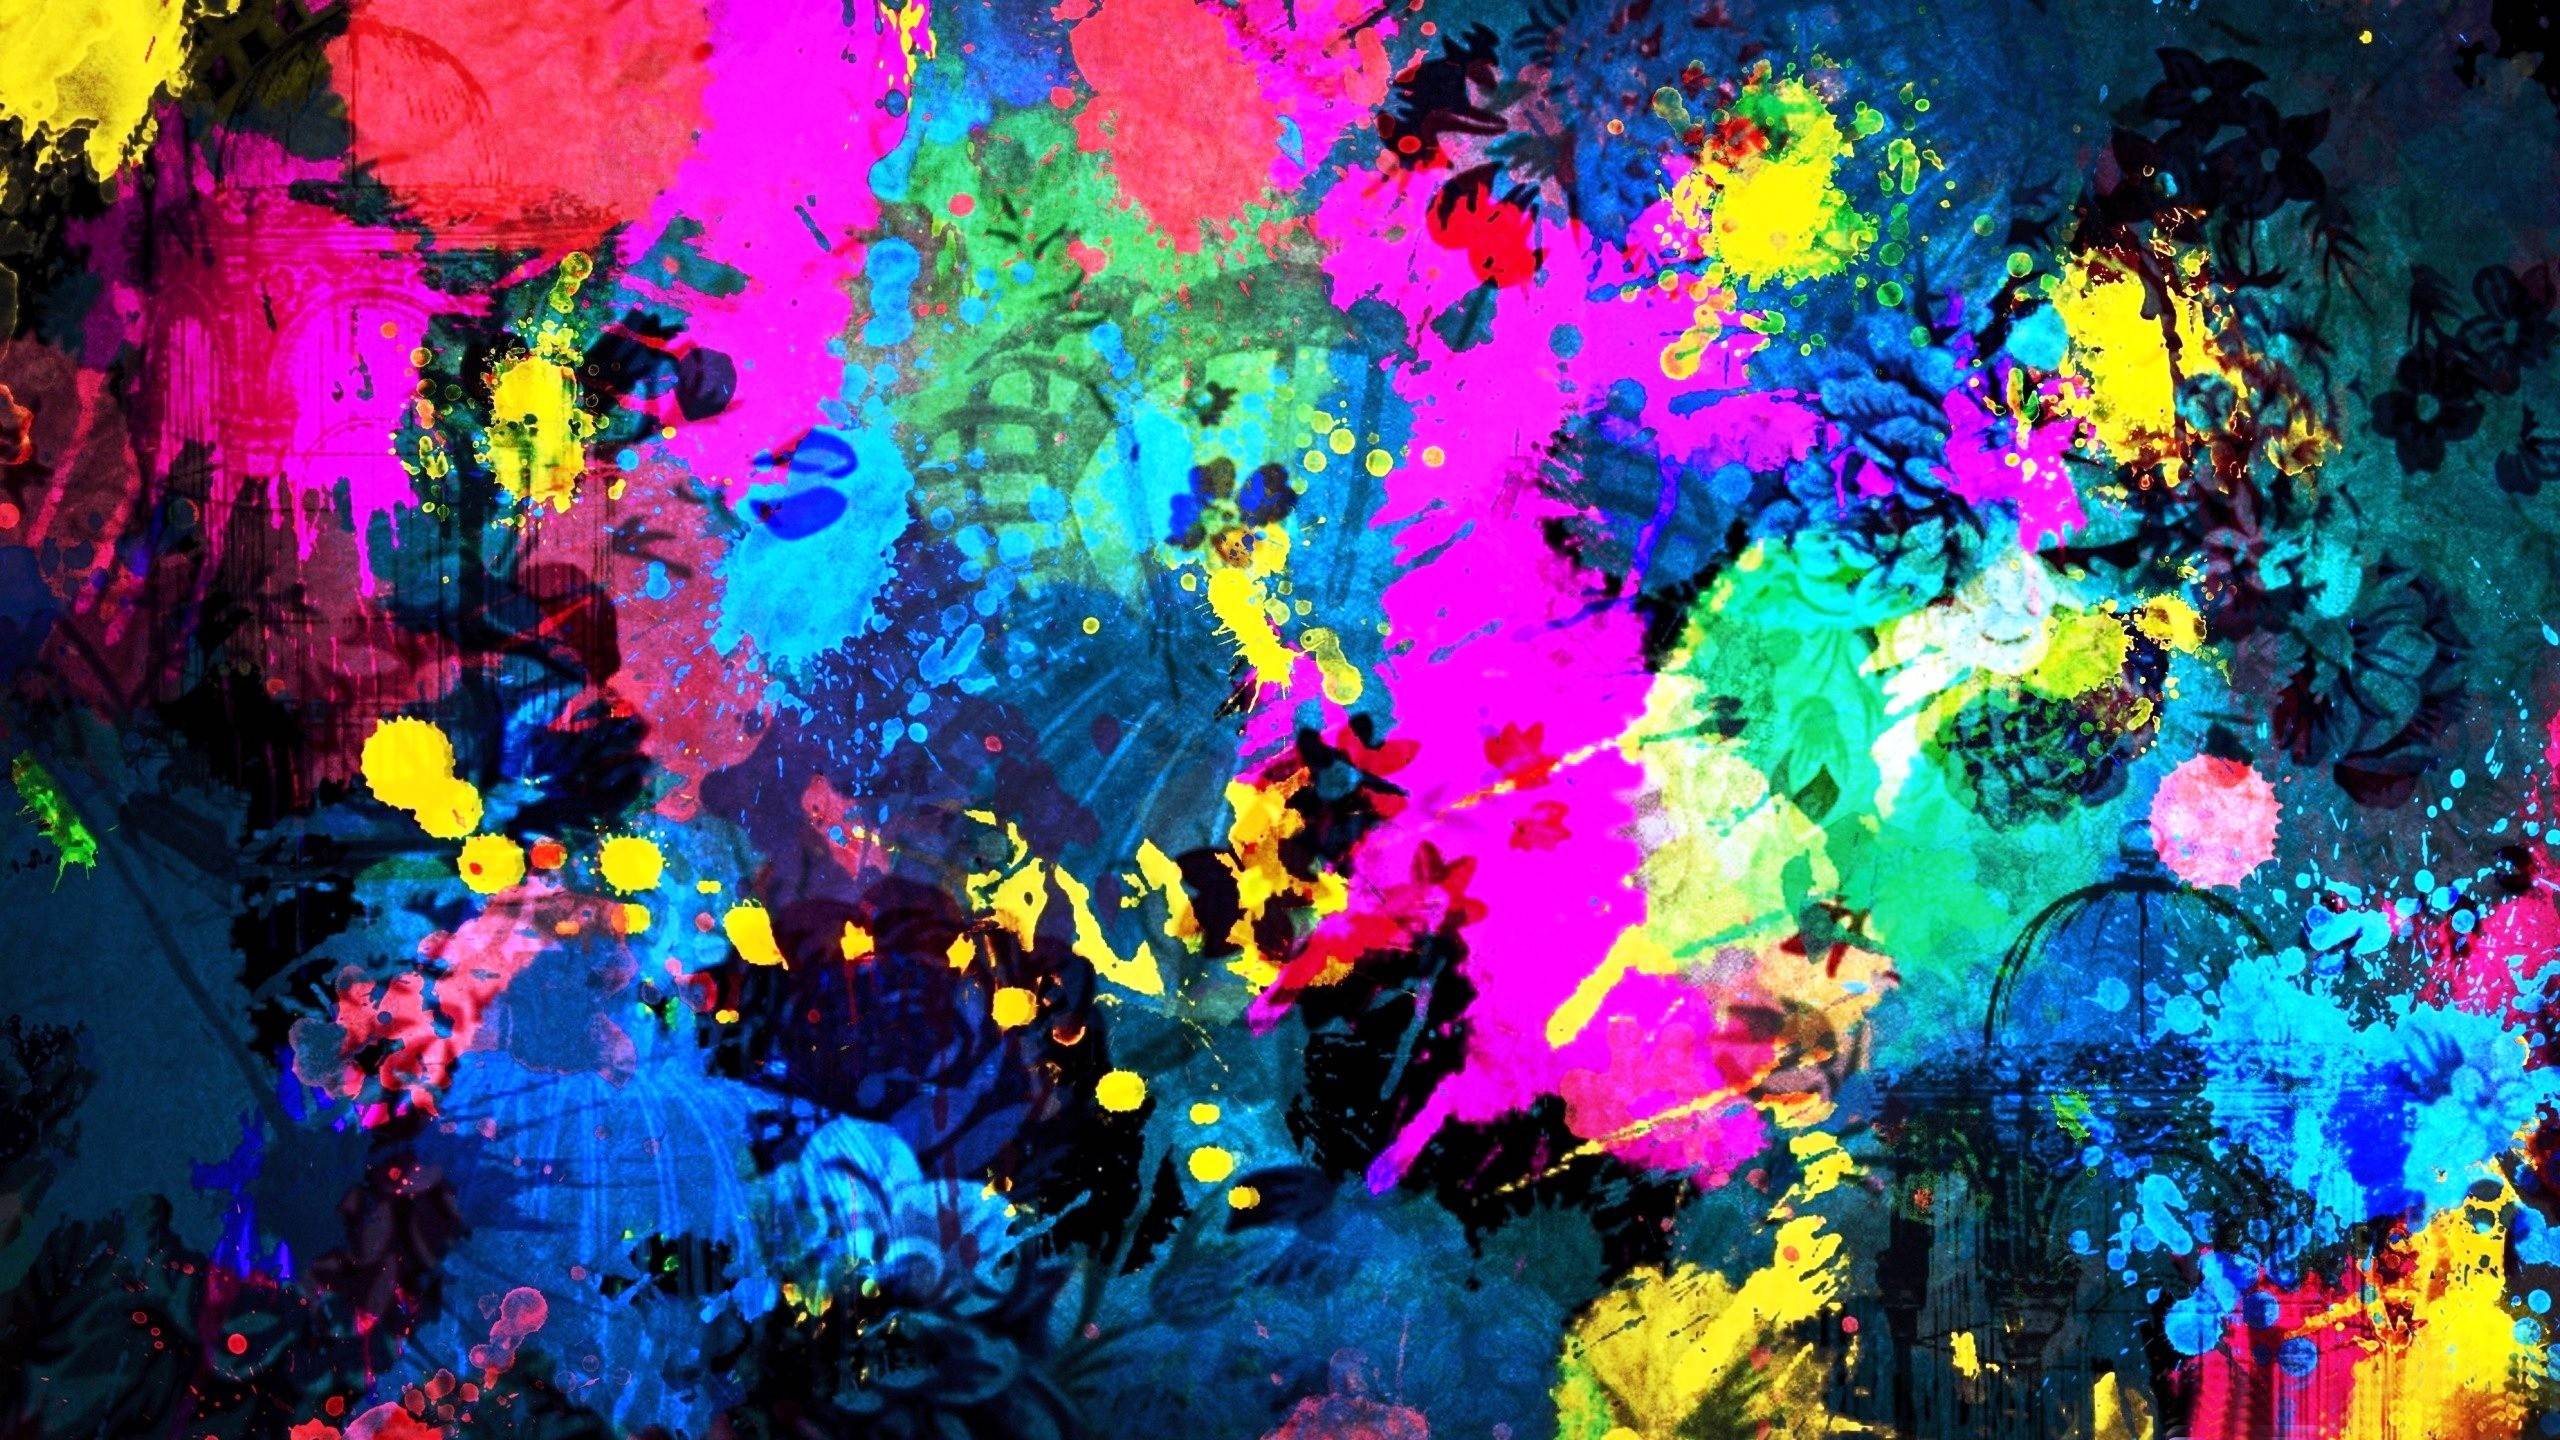 Abstract Art Backgrounds Wallpapers Download 5576 Full HD Wallpapers